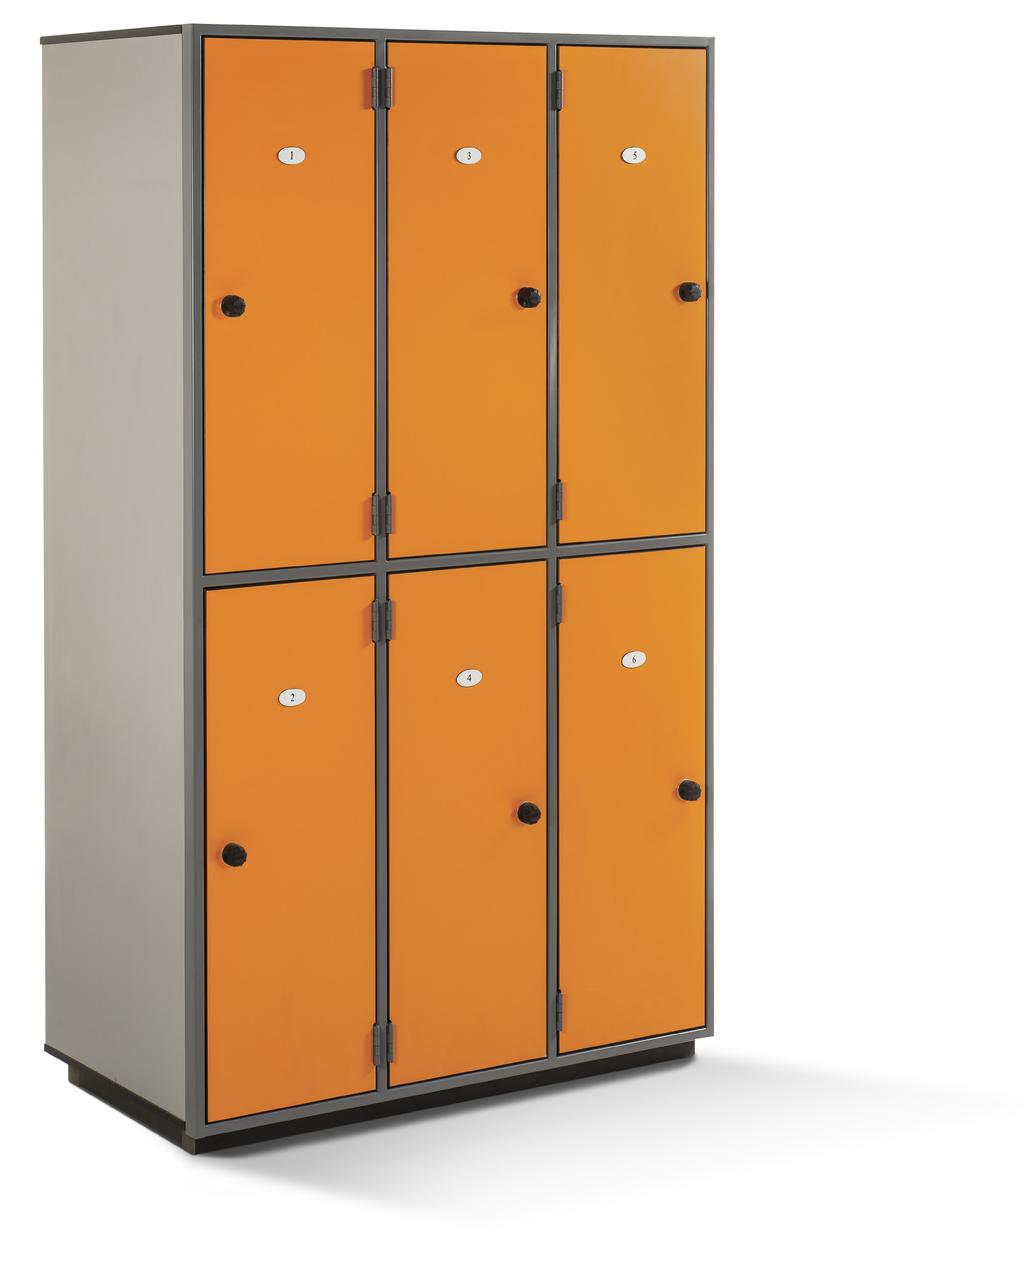 Personal Lockable Storage Woods PLS series is specifically designed and manufactured to the highest standards to ensure the safeguarding